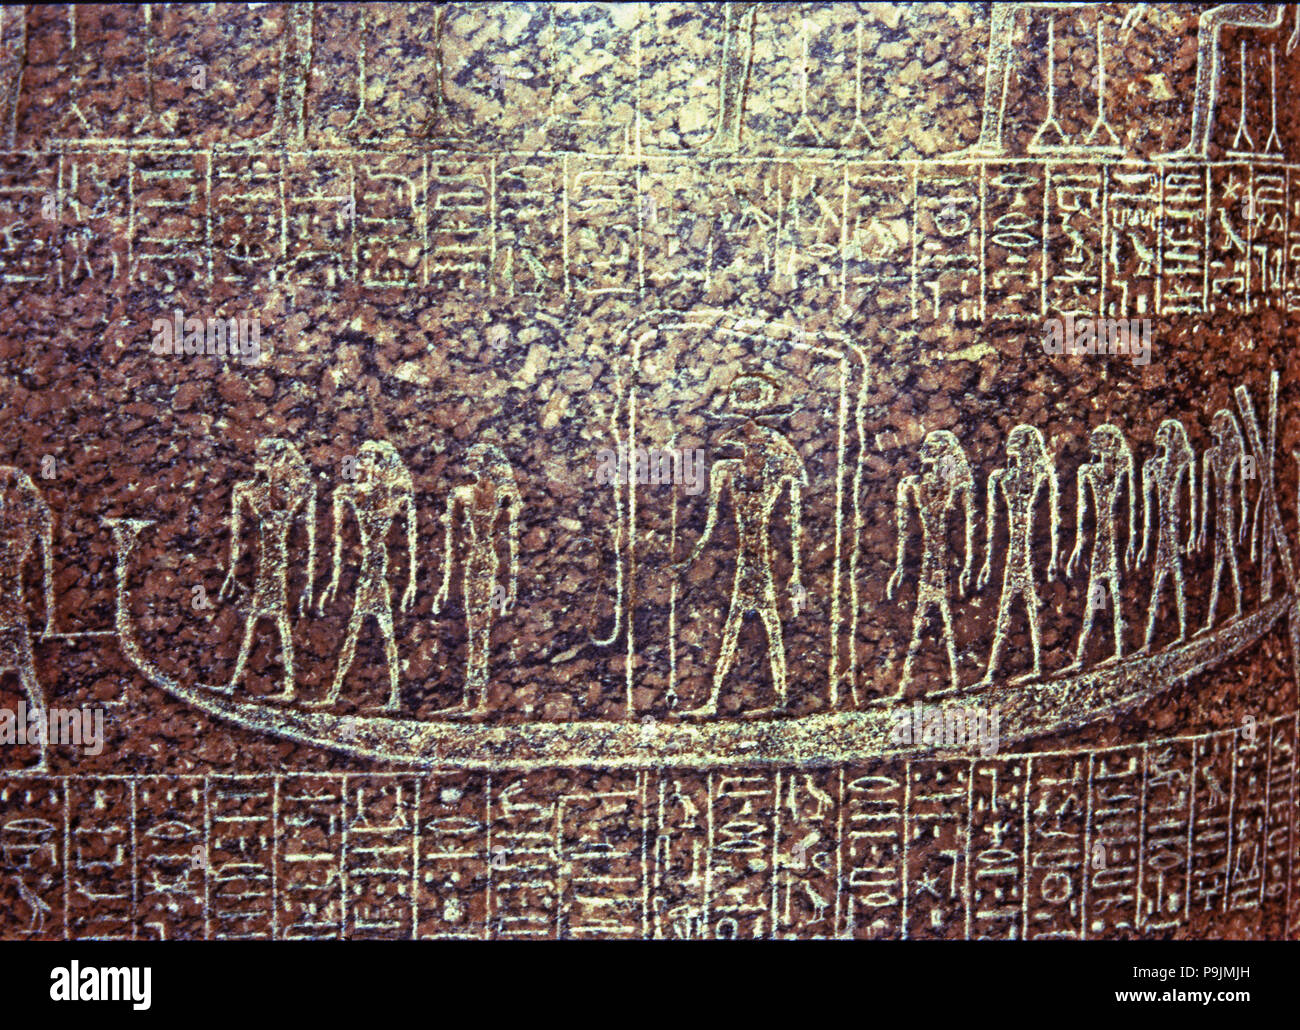 Bas-relief of the funerary sarcophagus of Ramesses III with the image of the ship of death, made … Stock Photo